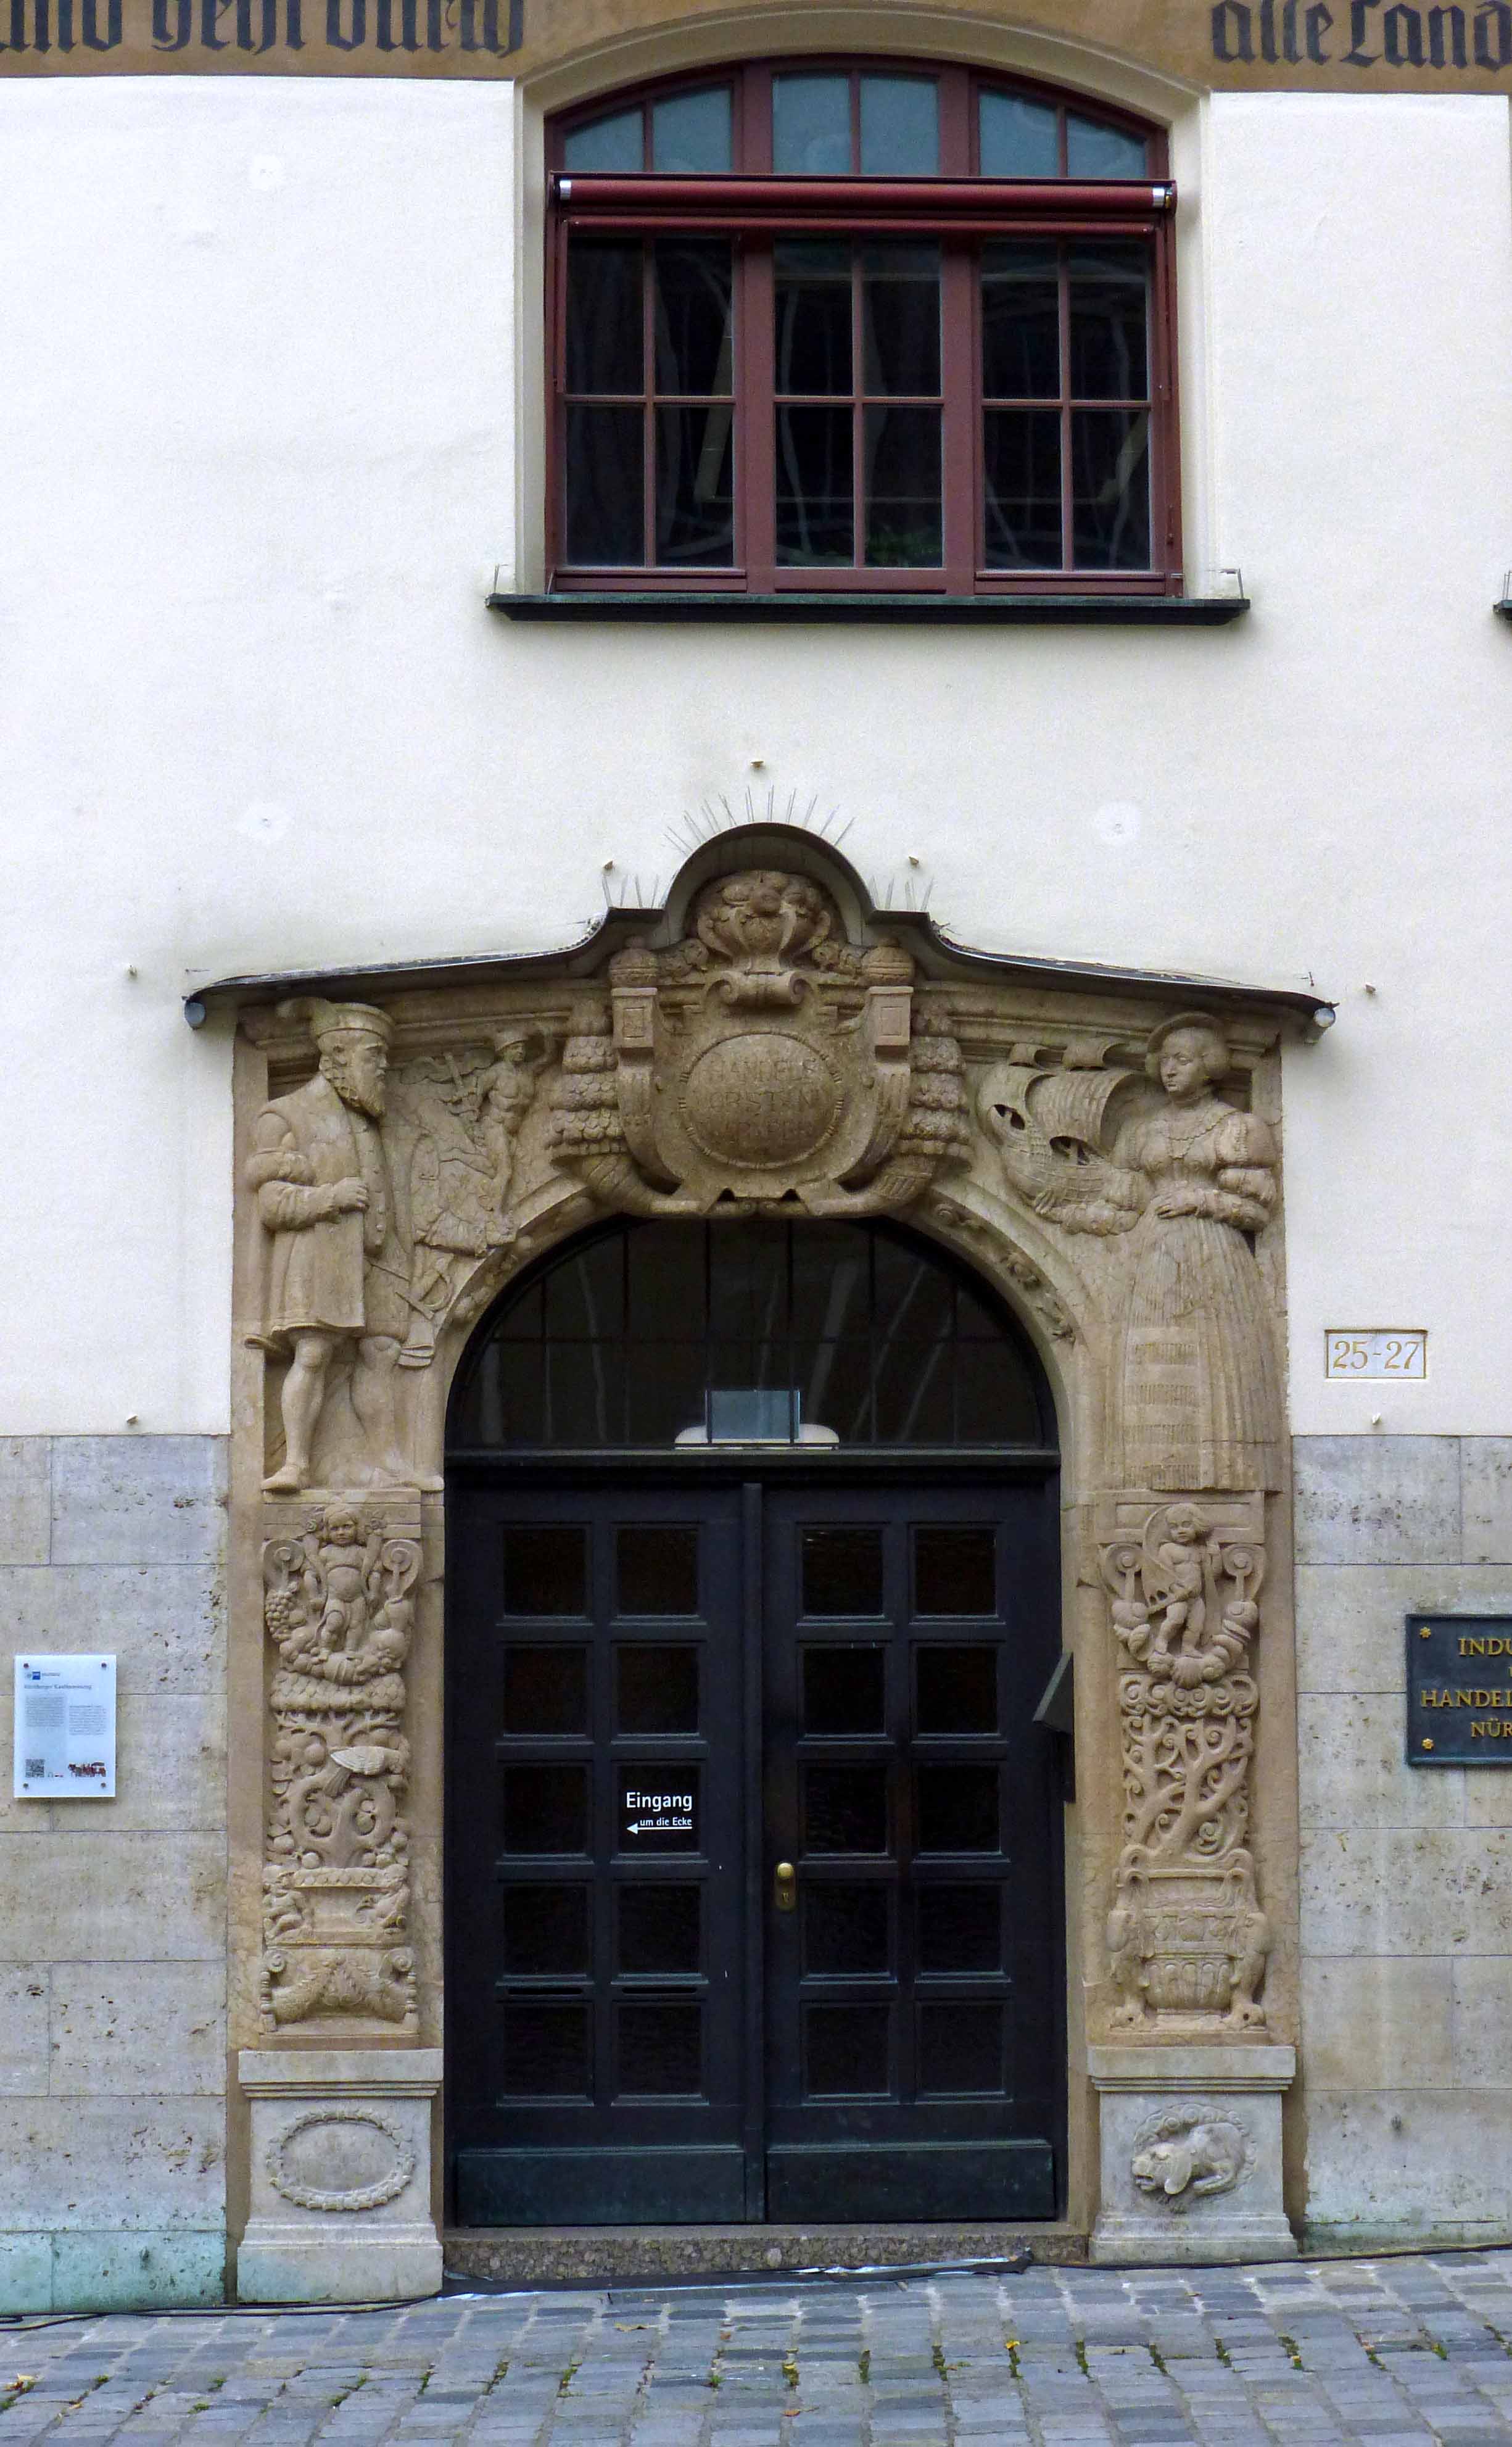 The Old Nuremberg Stock Market building is now part of the Chamber of Commerce